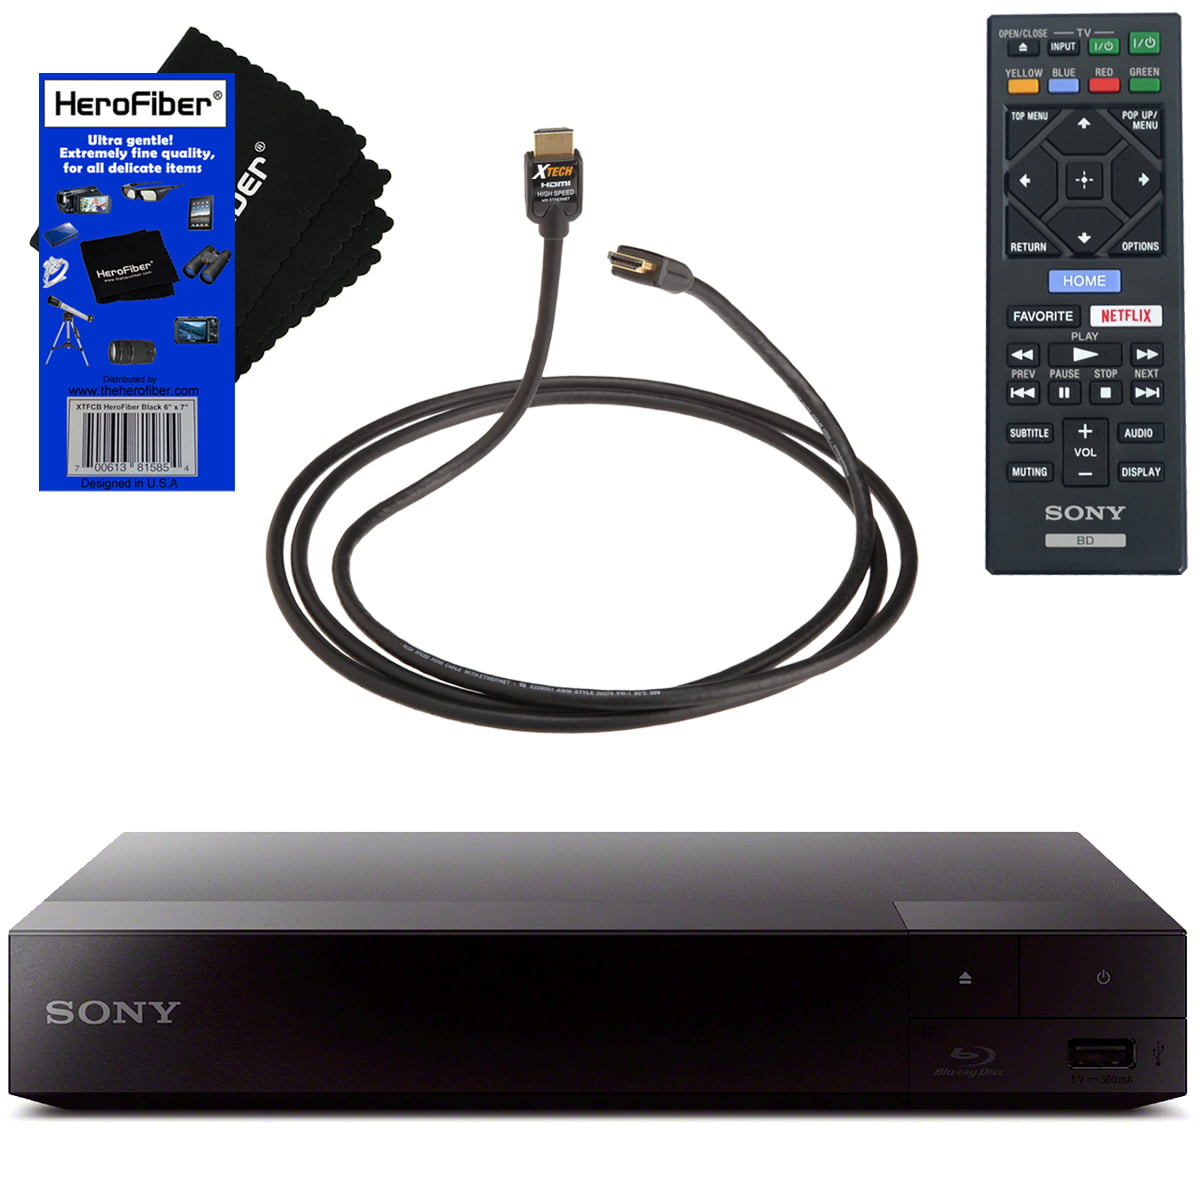 Sony p S3700 Blu Ray Disc Player With Built In Wi Fi Remote Control Bundled With Xtech High Speed Hdmi Cable With Ethernet Xtech Maintenance Kit Herofiber Ultra Gentle Cleaning Cloth Walmart Com